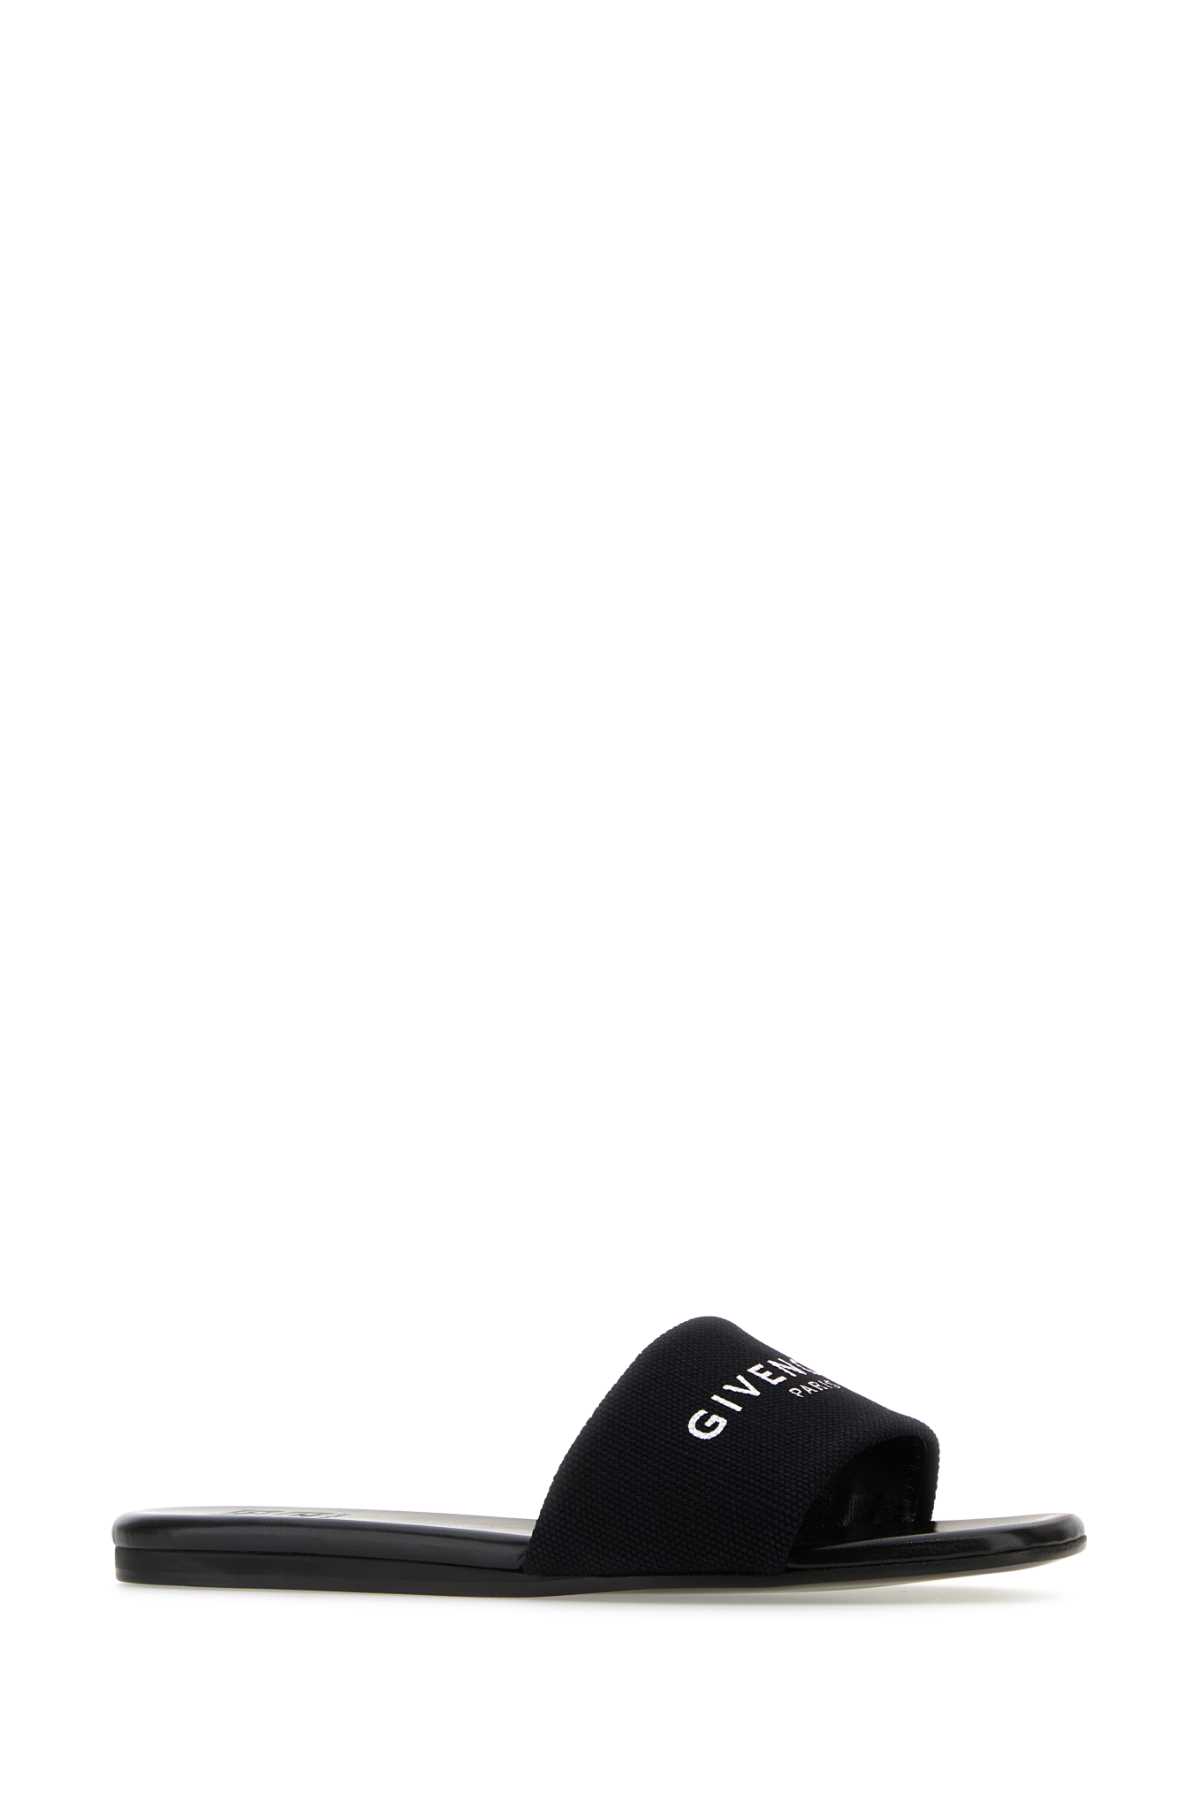 Shop Givenchy Black Canvas 4g Slippers